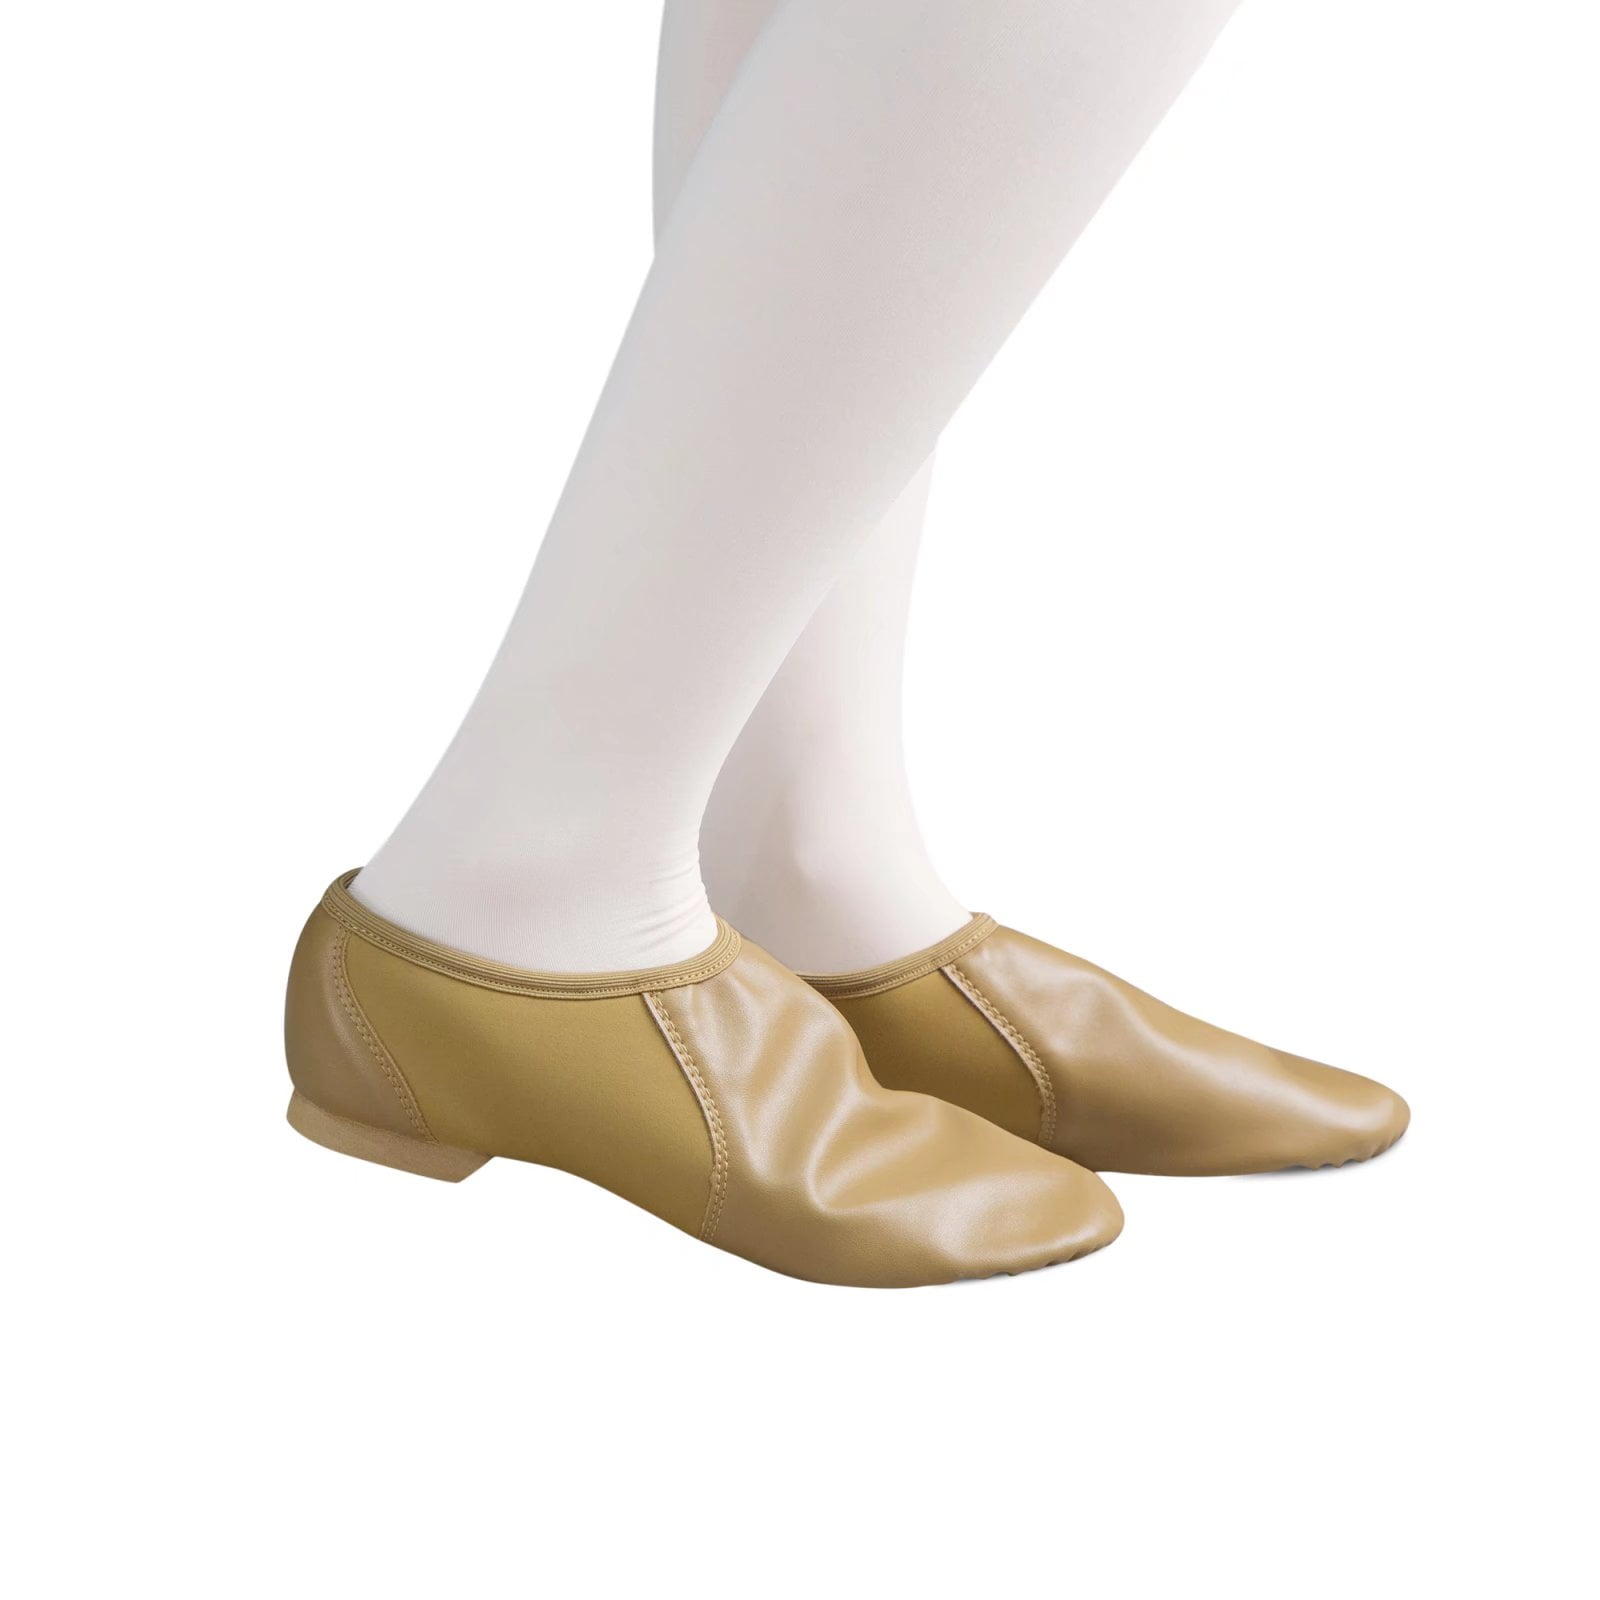 JUNIOR 7 - ADULT 11 MODERN DANCE SHOES WHITE LEATHER RUBBER SOLED JAZZ